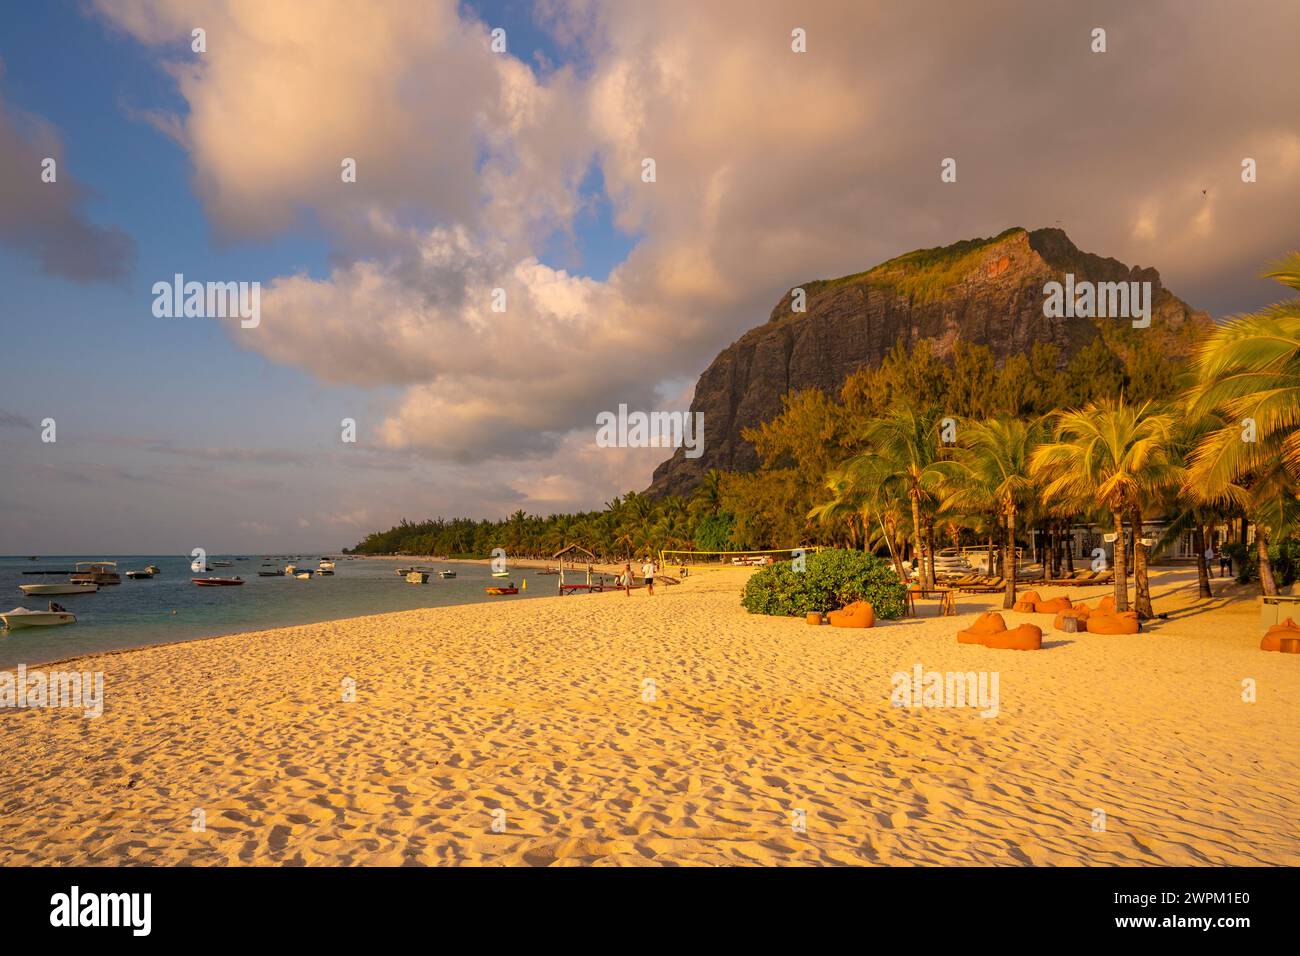 View of Le Morne Public Beach at sunset, Le Morne, Riviere Noire District, Mauritius, Indian Ocean, Africa Stock Photo